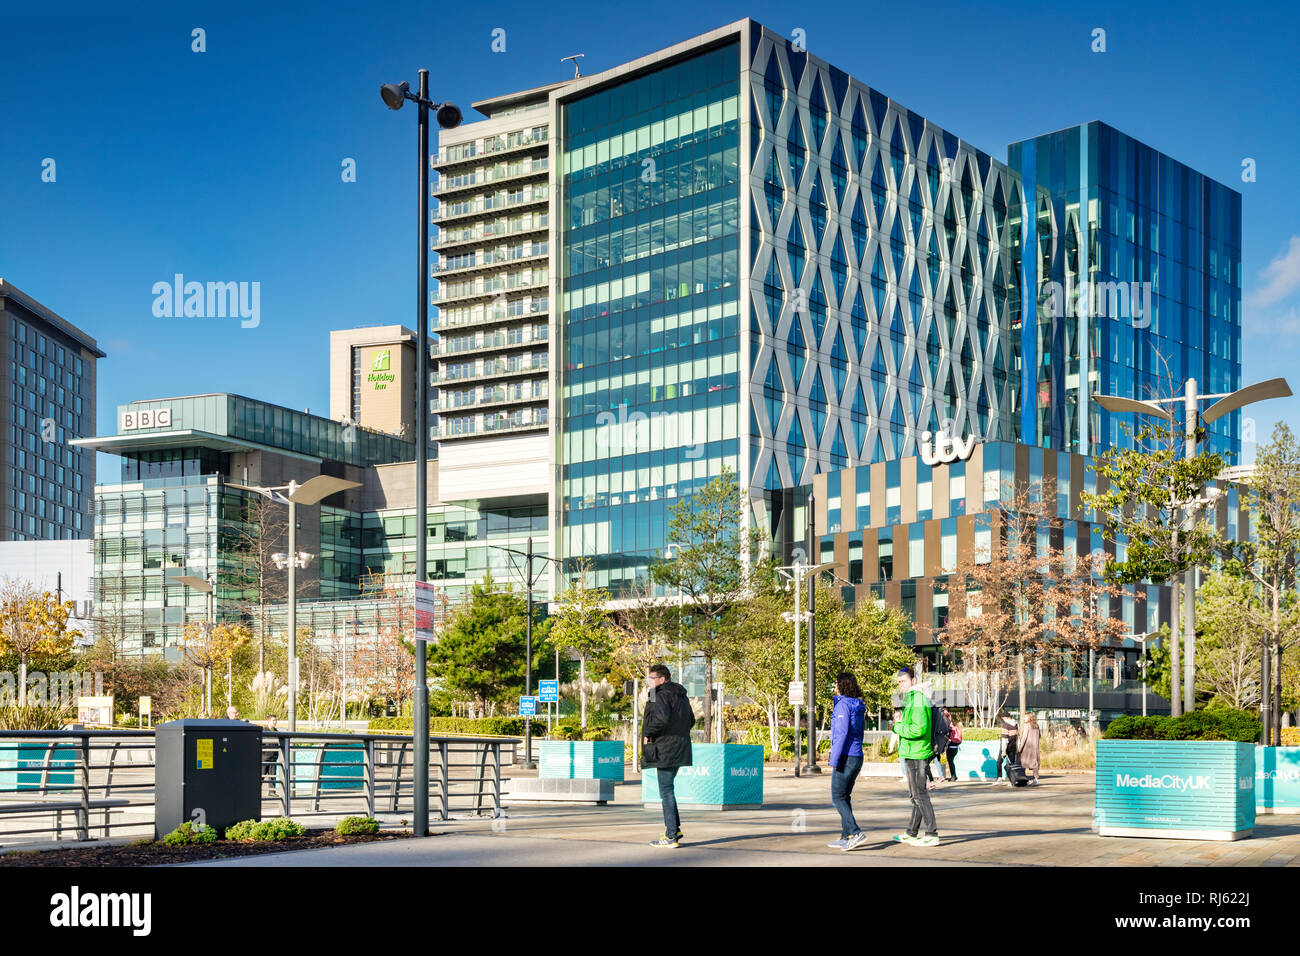 2 November 2018: Salford Quays, Manchester, UK - ITV and BBC buildings on a sunny autumn day, clear blue sky, colourfully dressed young people in... Stock Photo